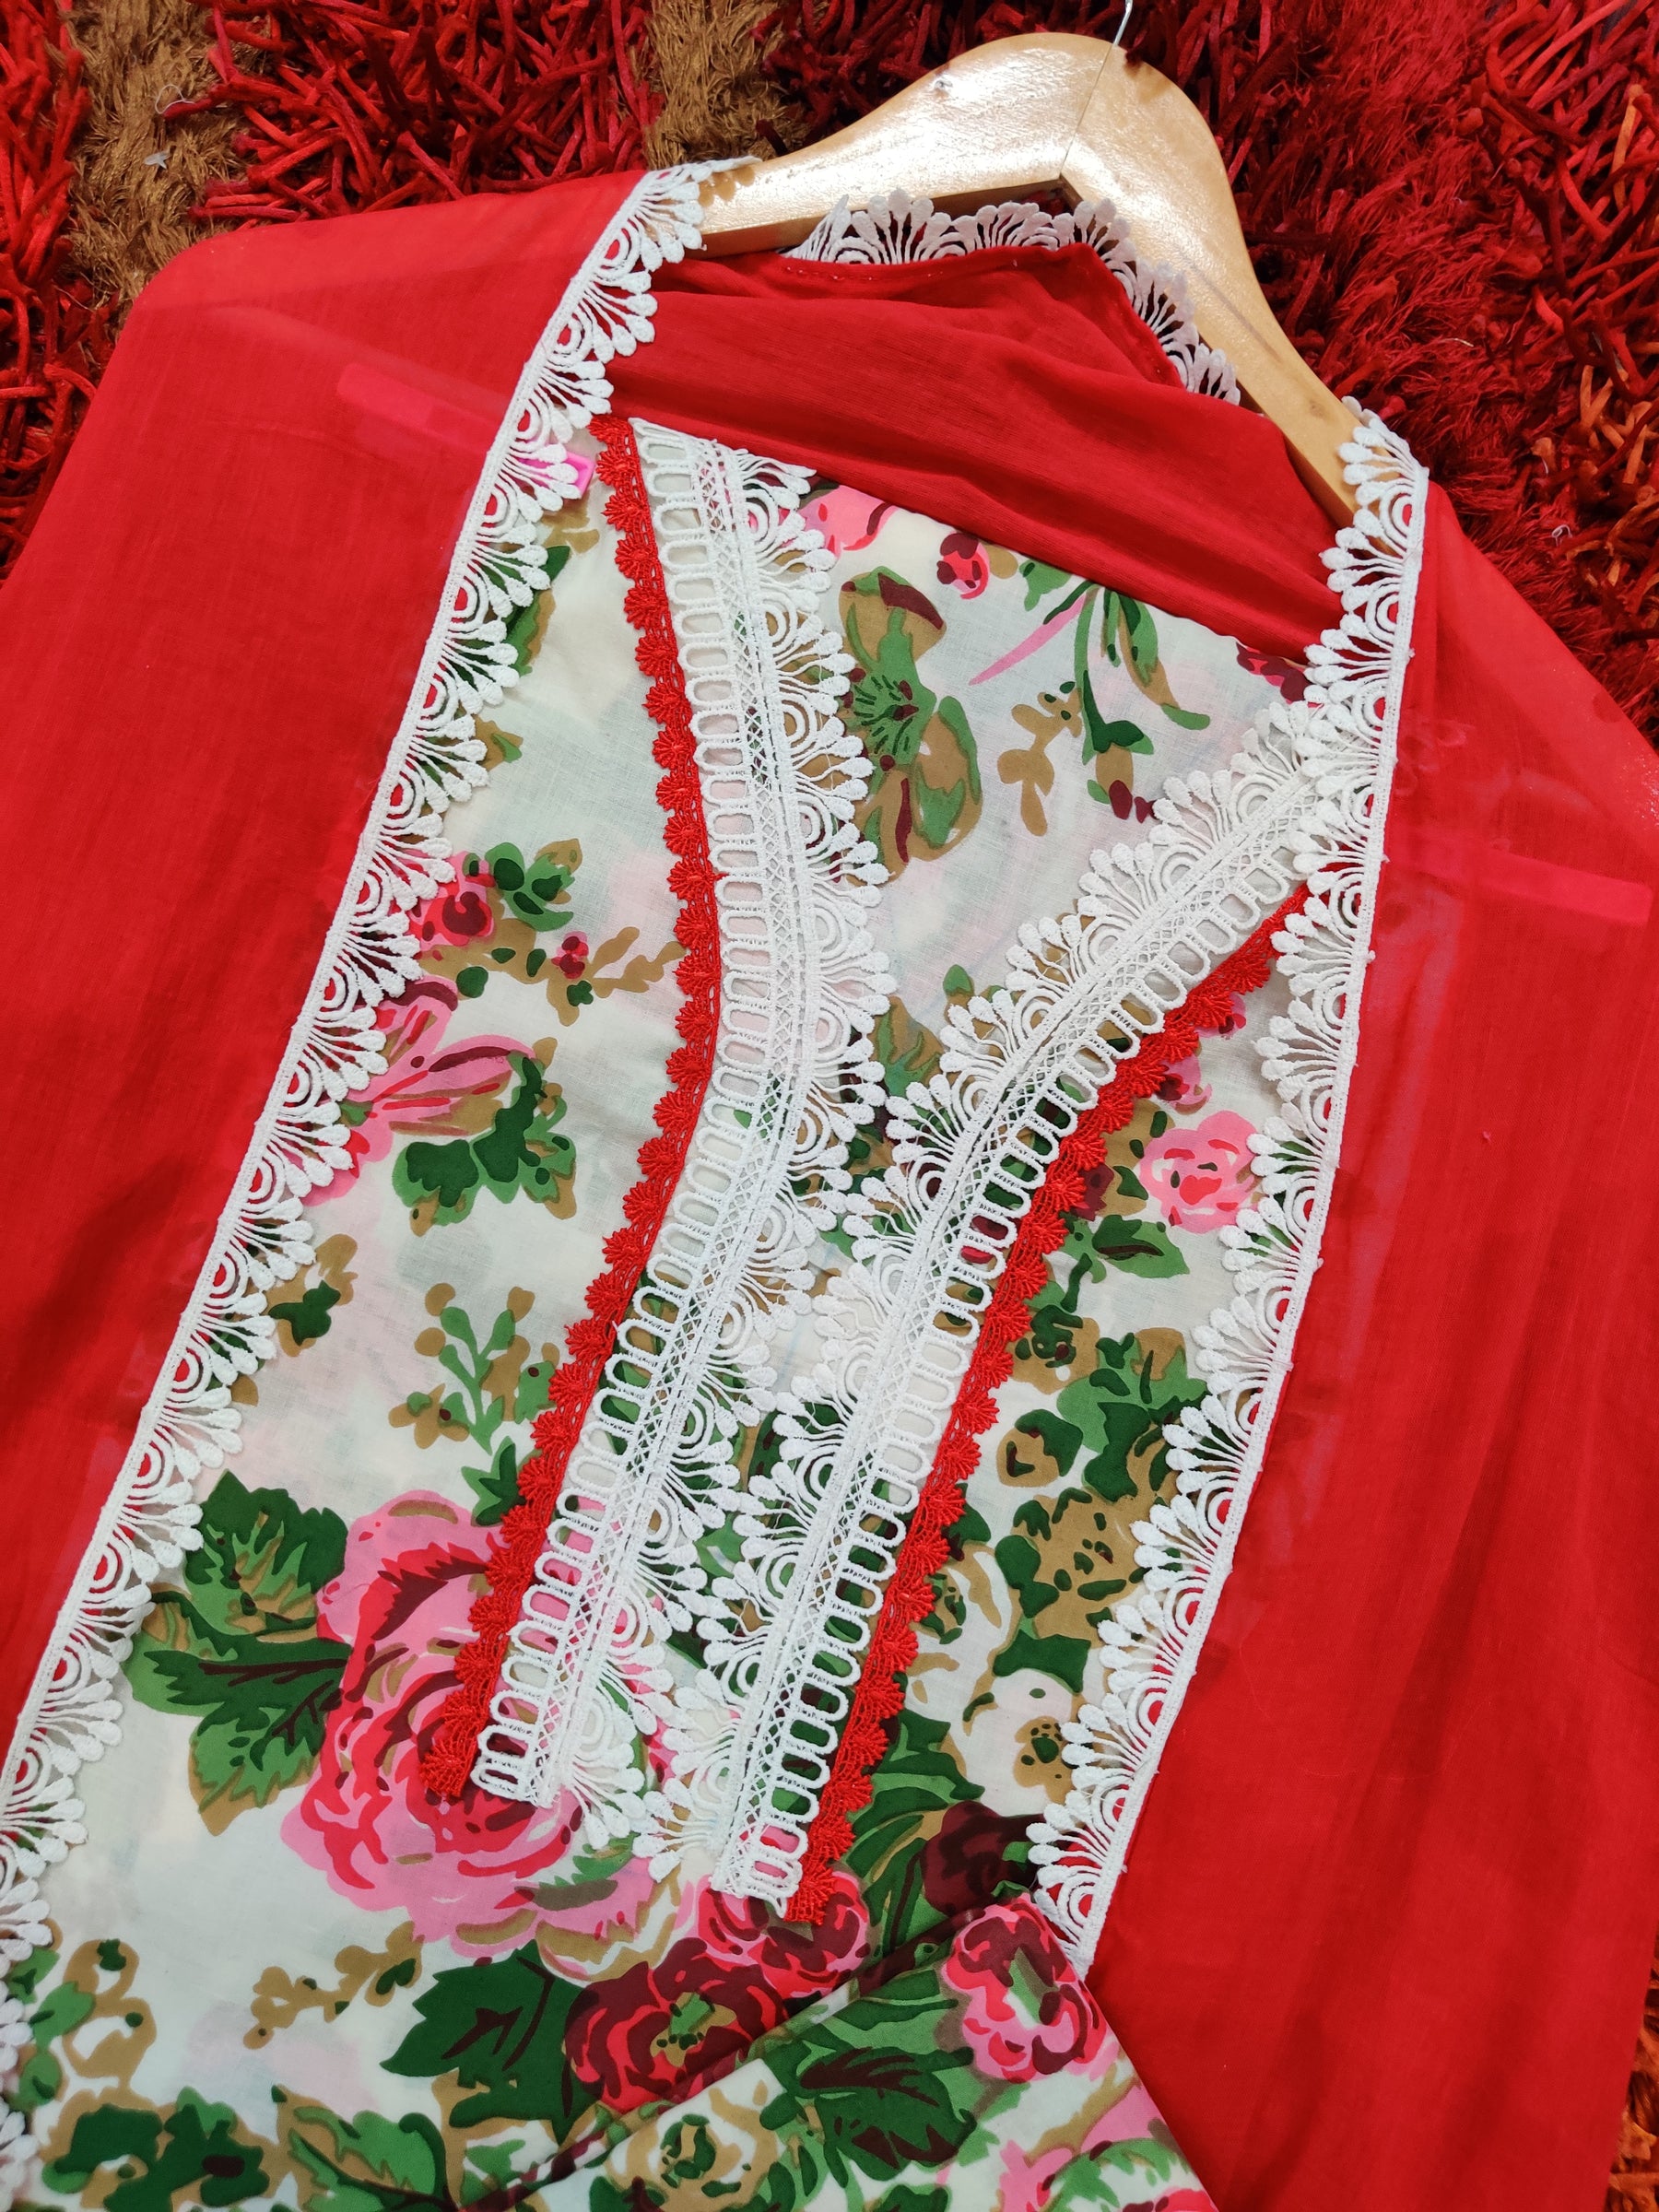 Floral Digital Print Cotton Enhanced with Delicate White and Red Laces Unstitched Dress Material Suit Set